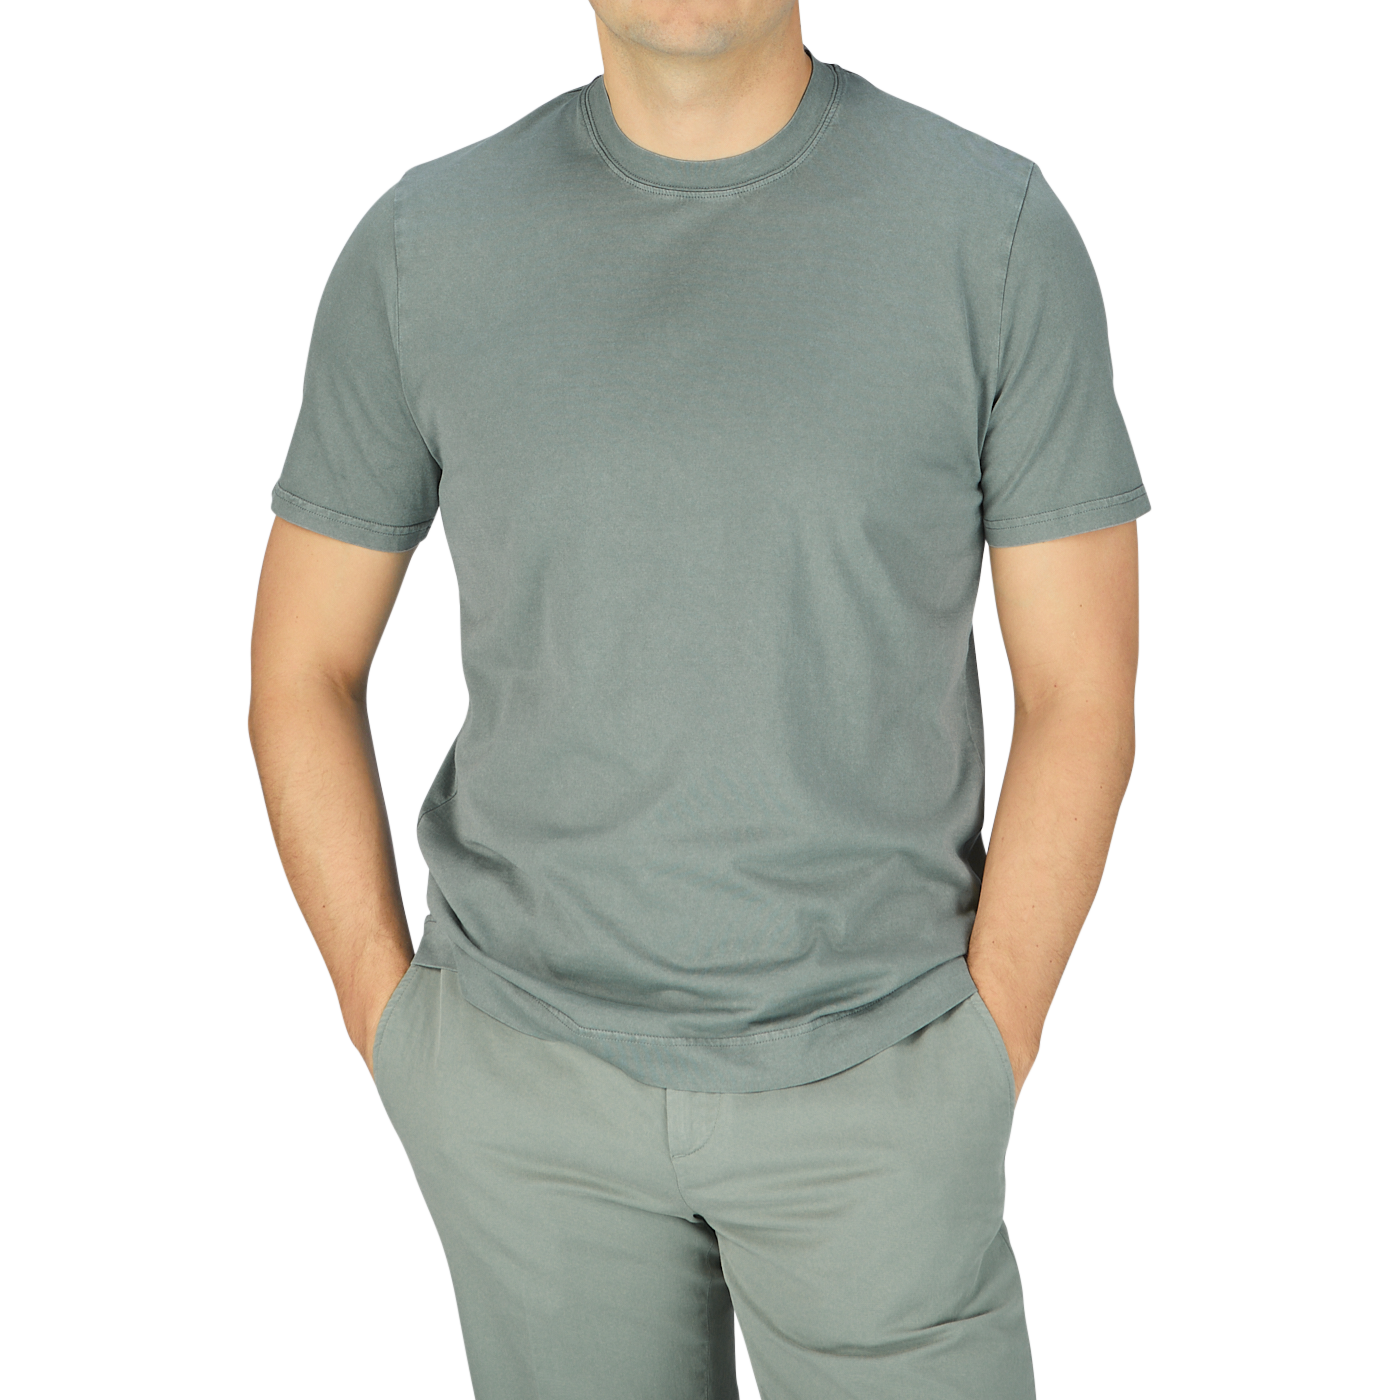 A man wearing a luxury Fedeli Olive Green Organic Cotton T-shirt and gray pants.